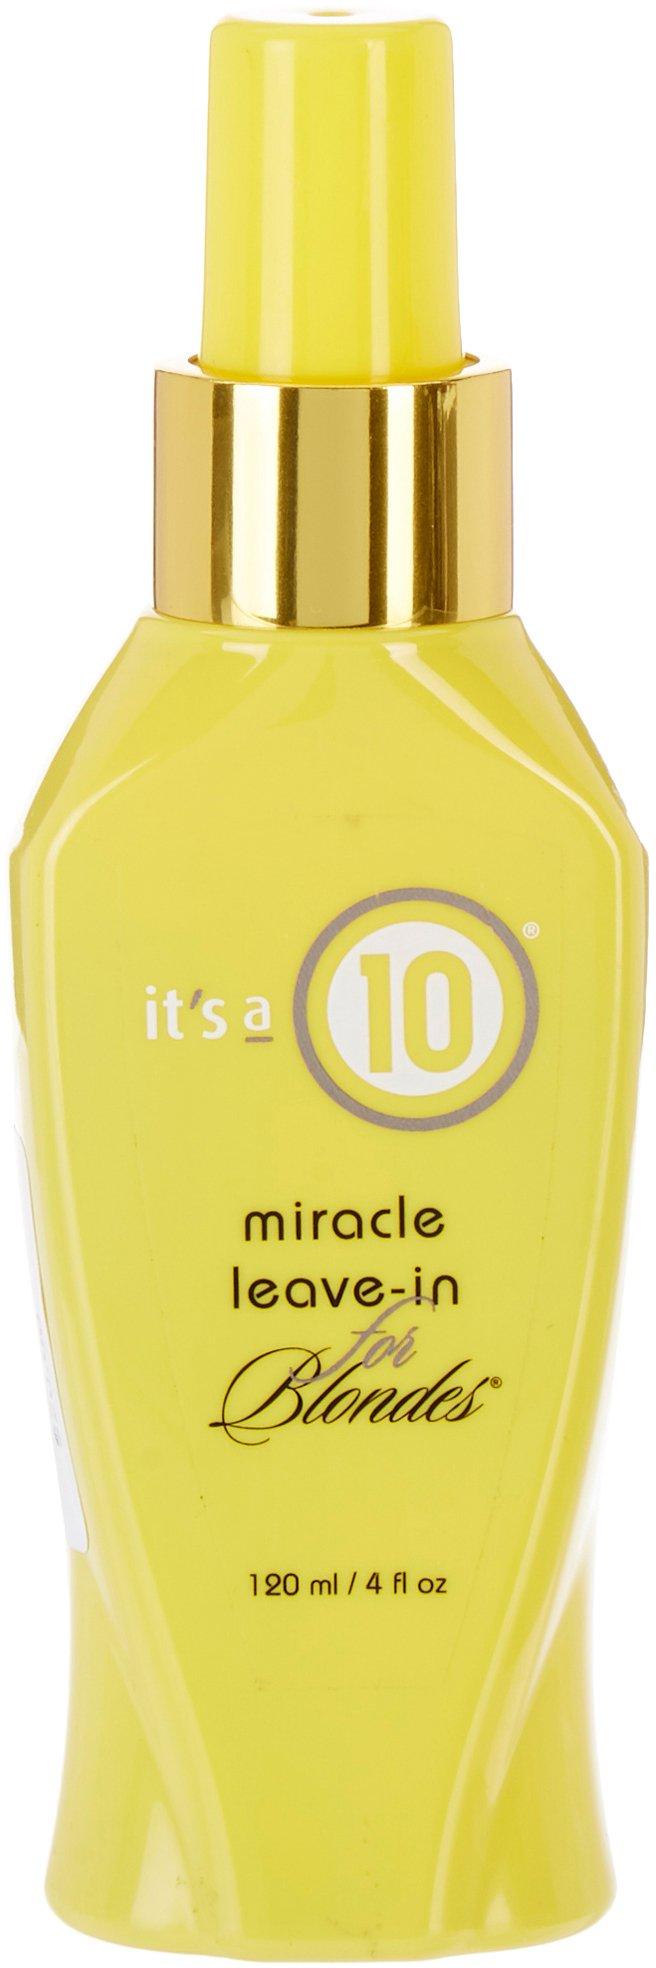 It's A 10 4 oz Miracle Leave-In Treatment